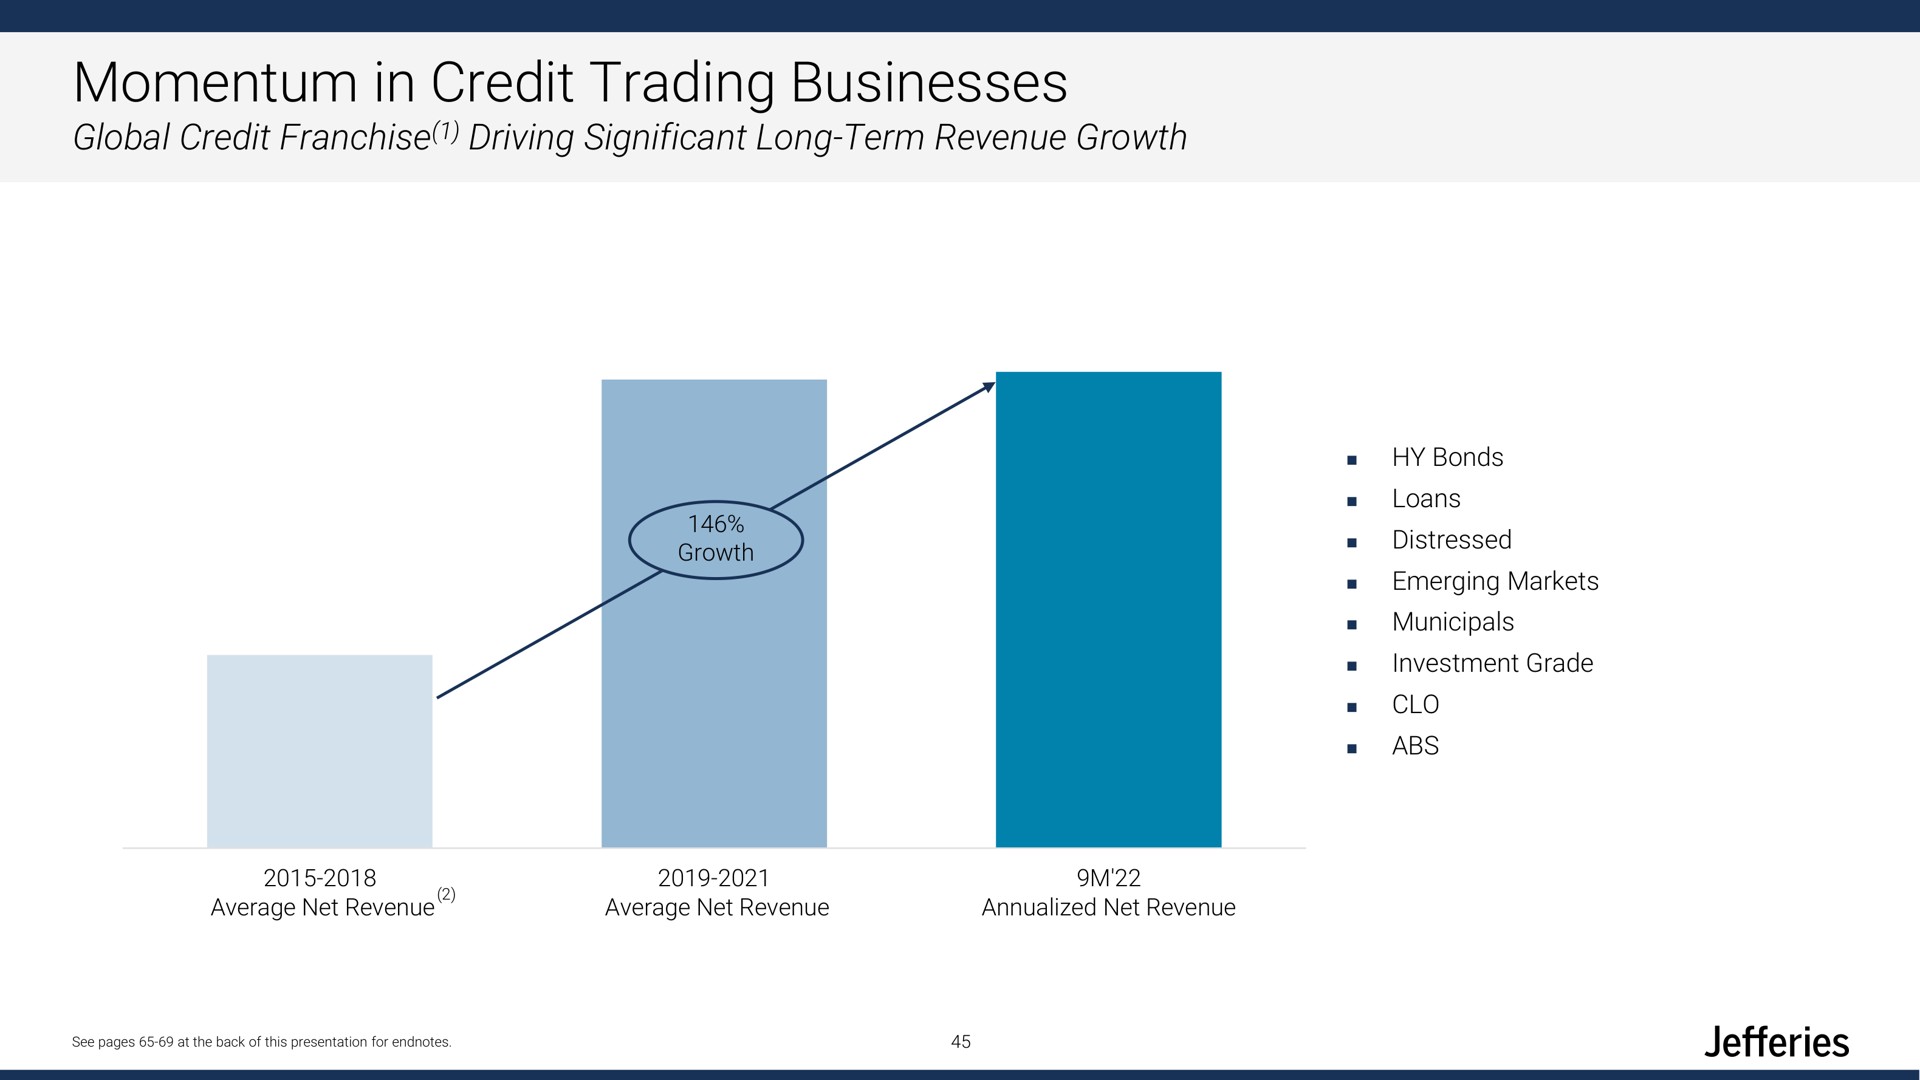 momentum in credit trading businesses | Jefferies Financial Group